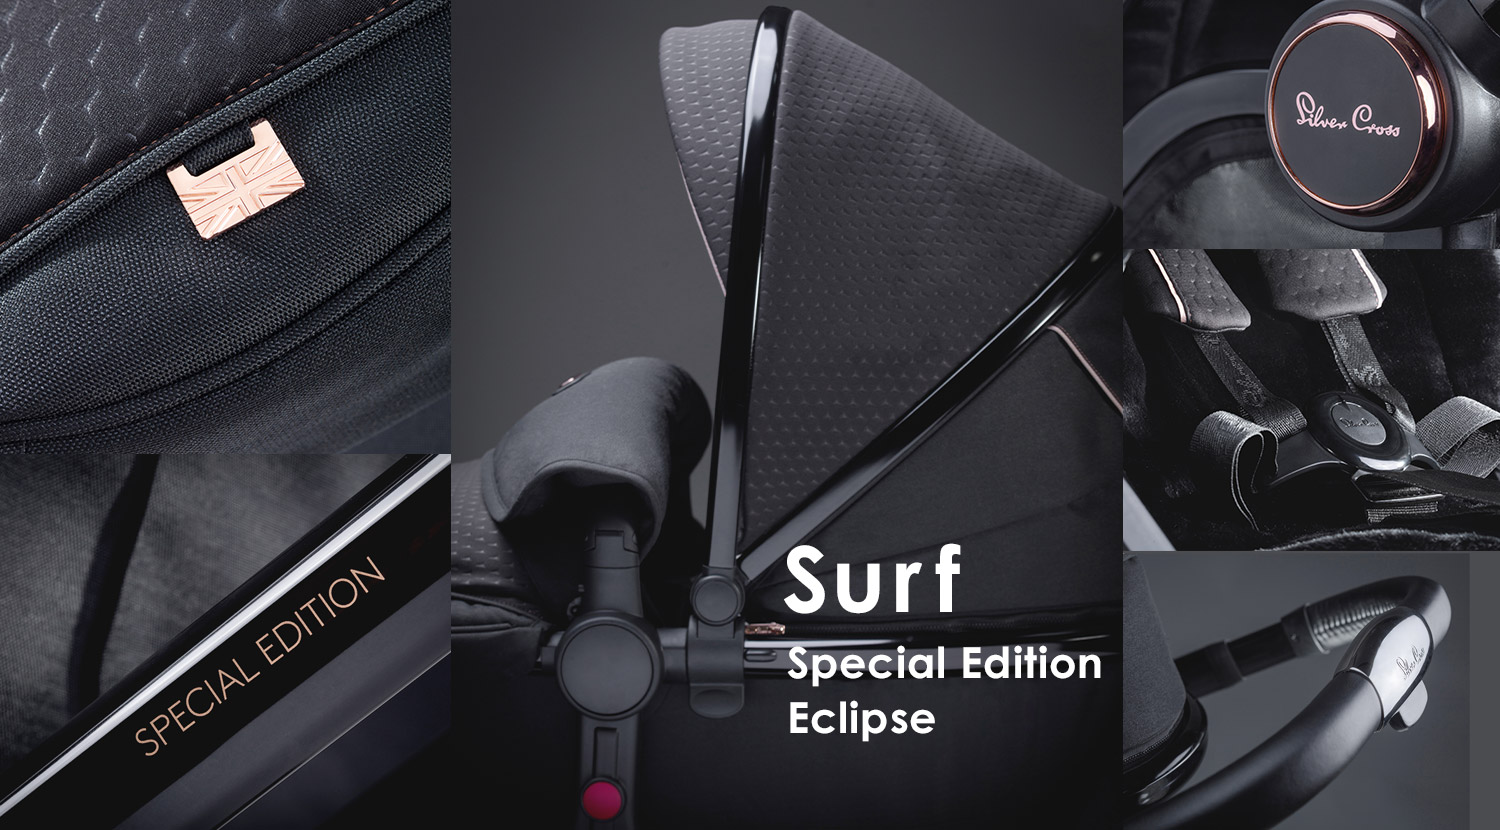 Surf Special Edition Eclipse / Silver Cross